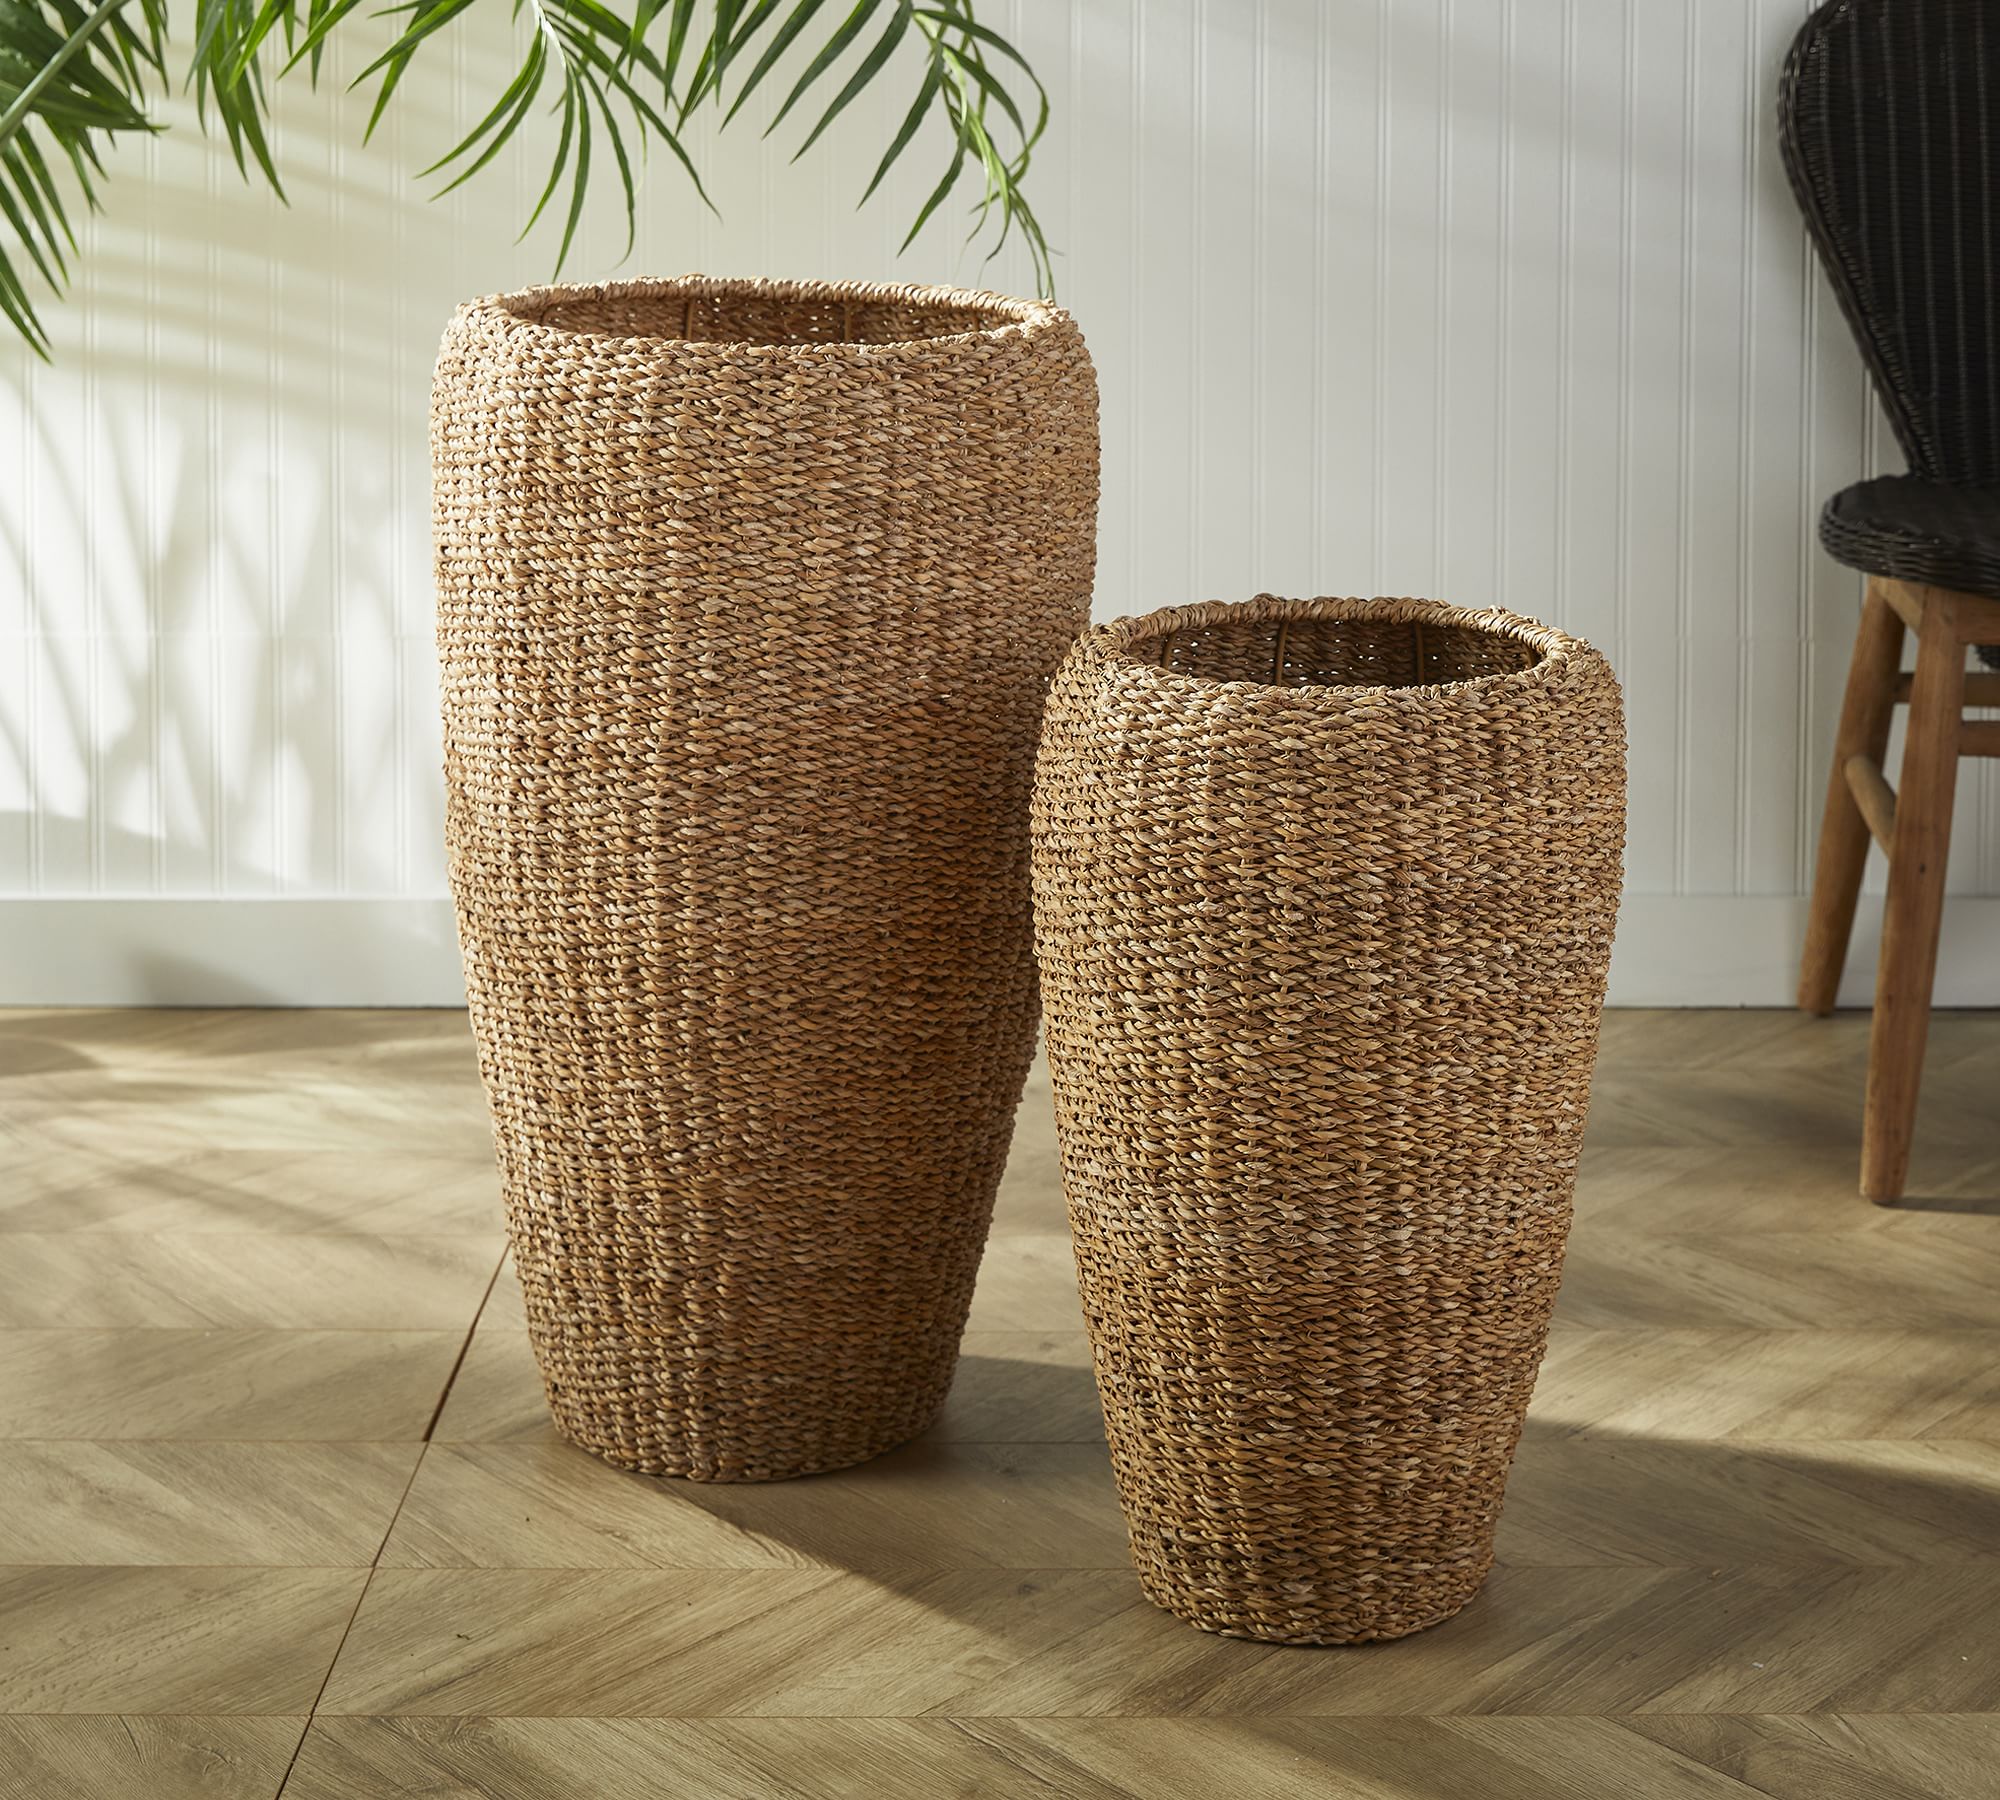 Andria Handwoven Tall Seagrass Planters - Set of 2